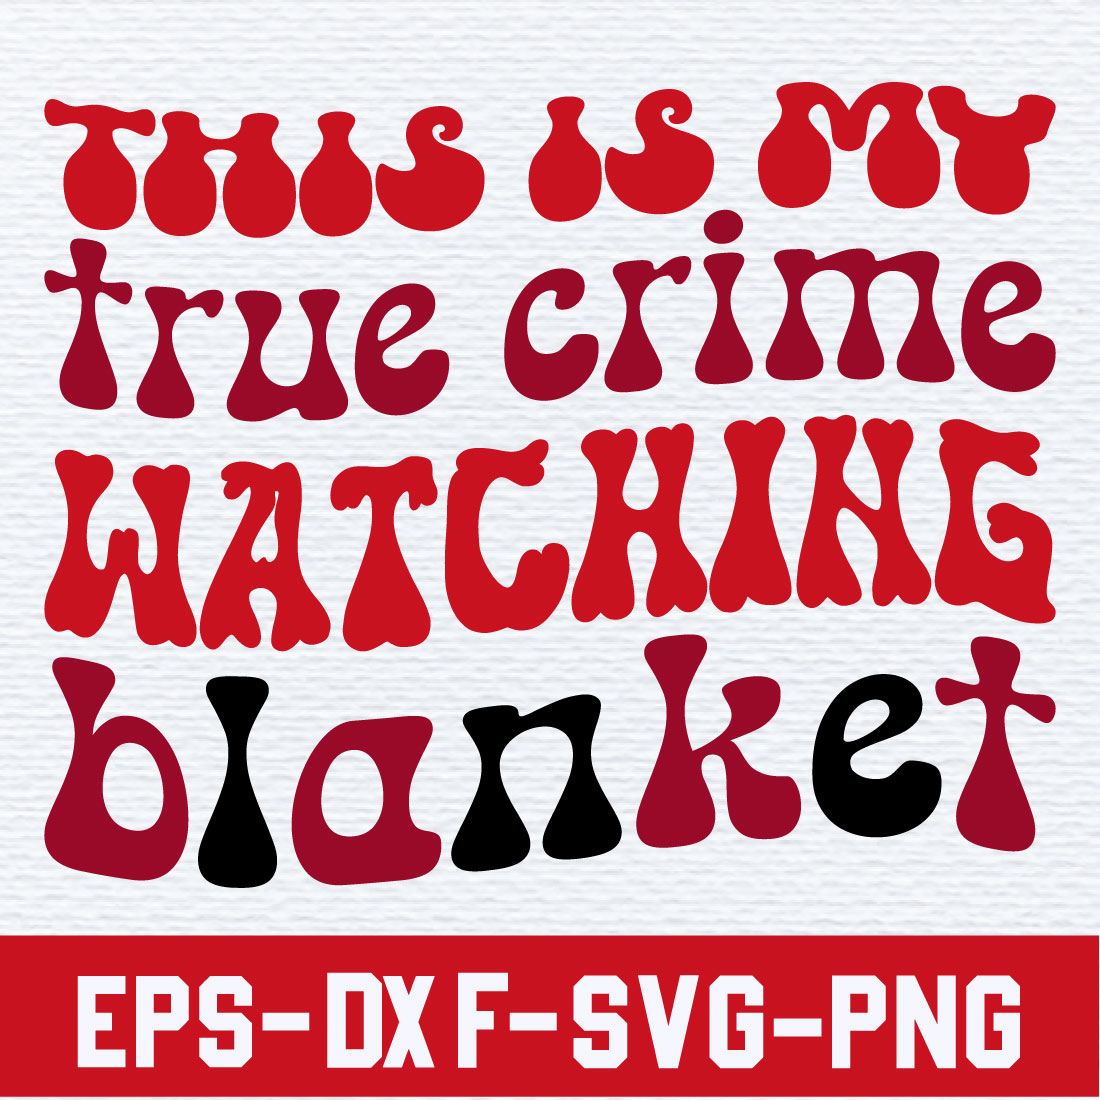 This is my true crime watching blanket cover image.